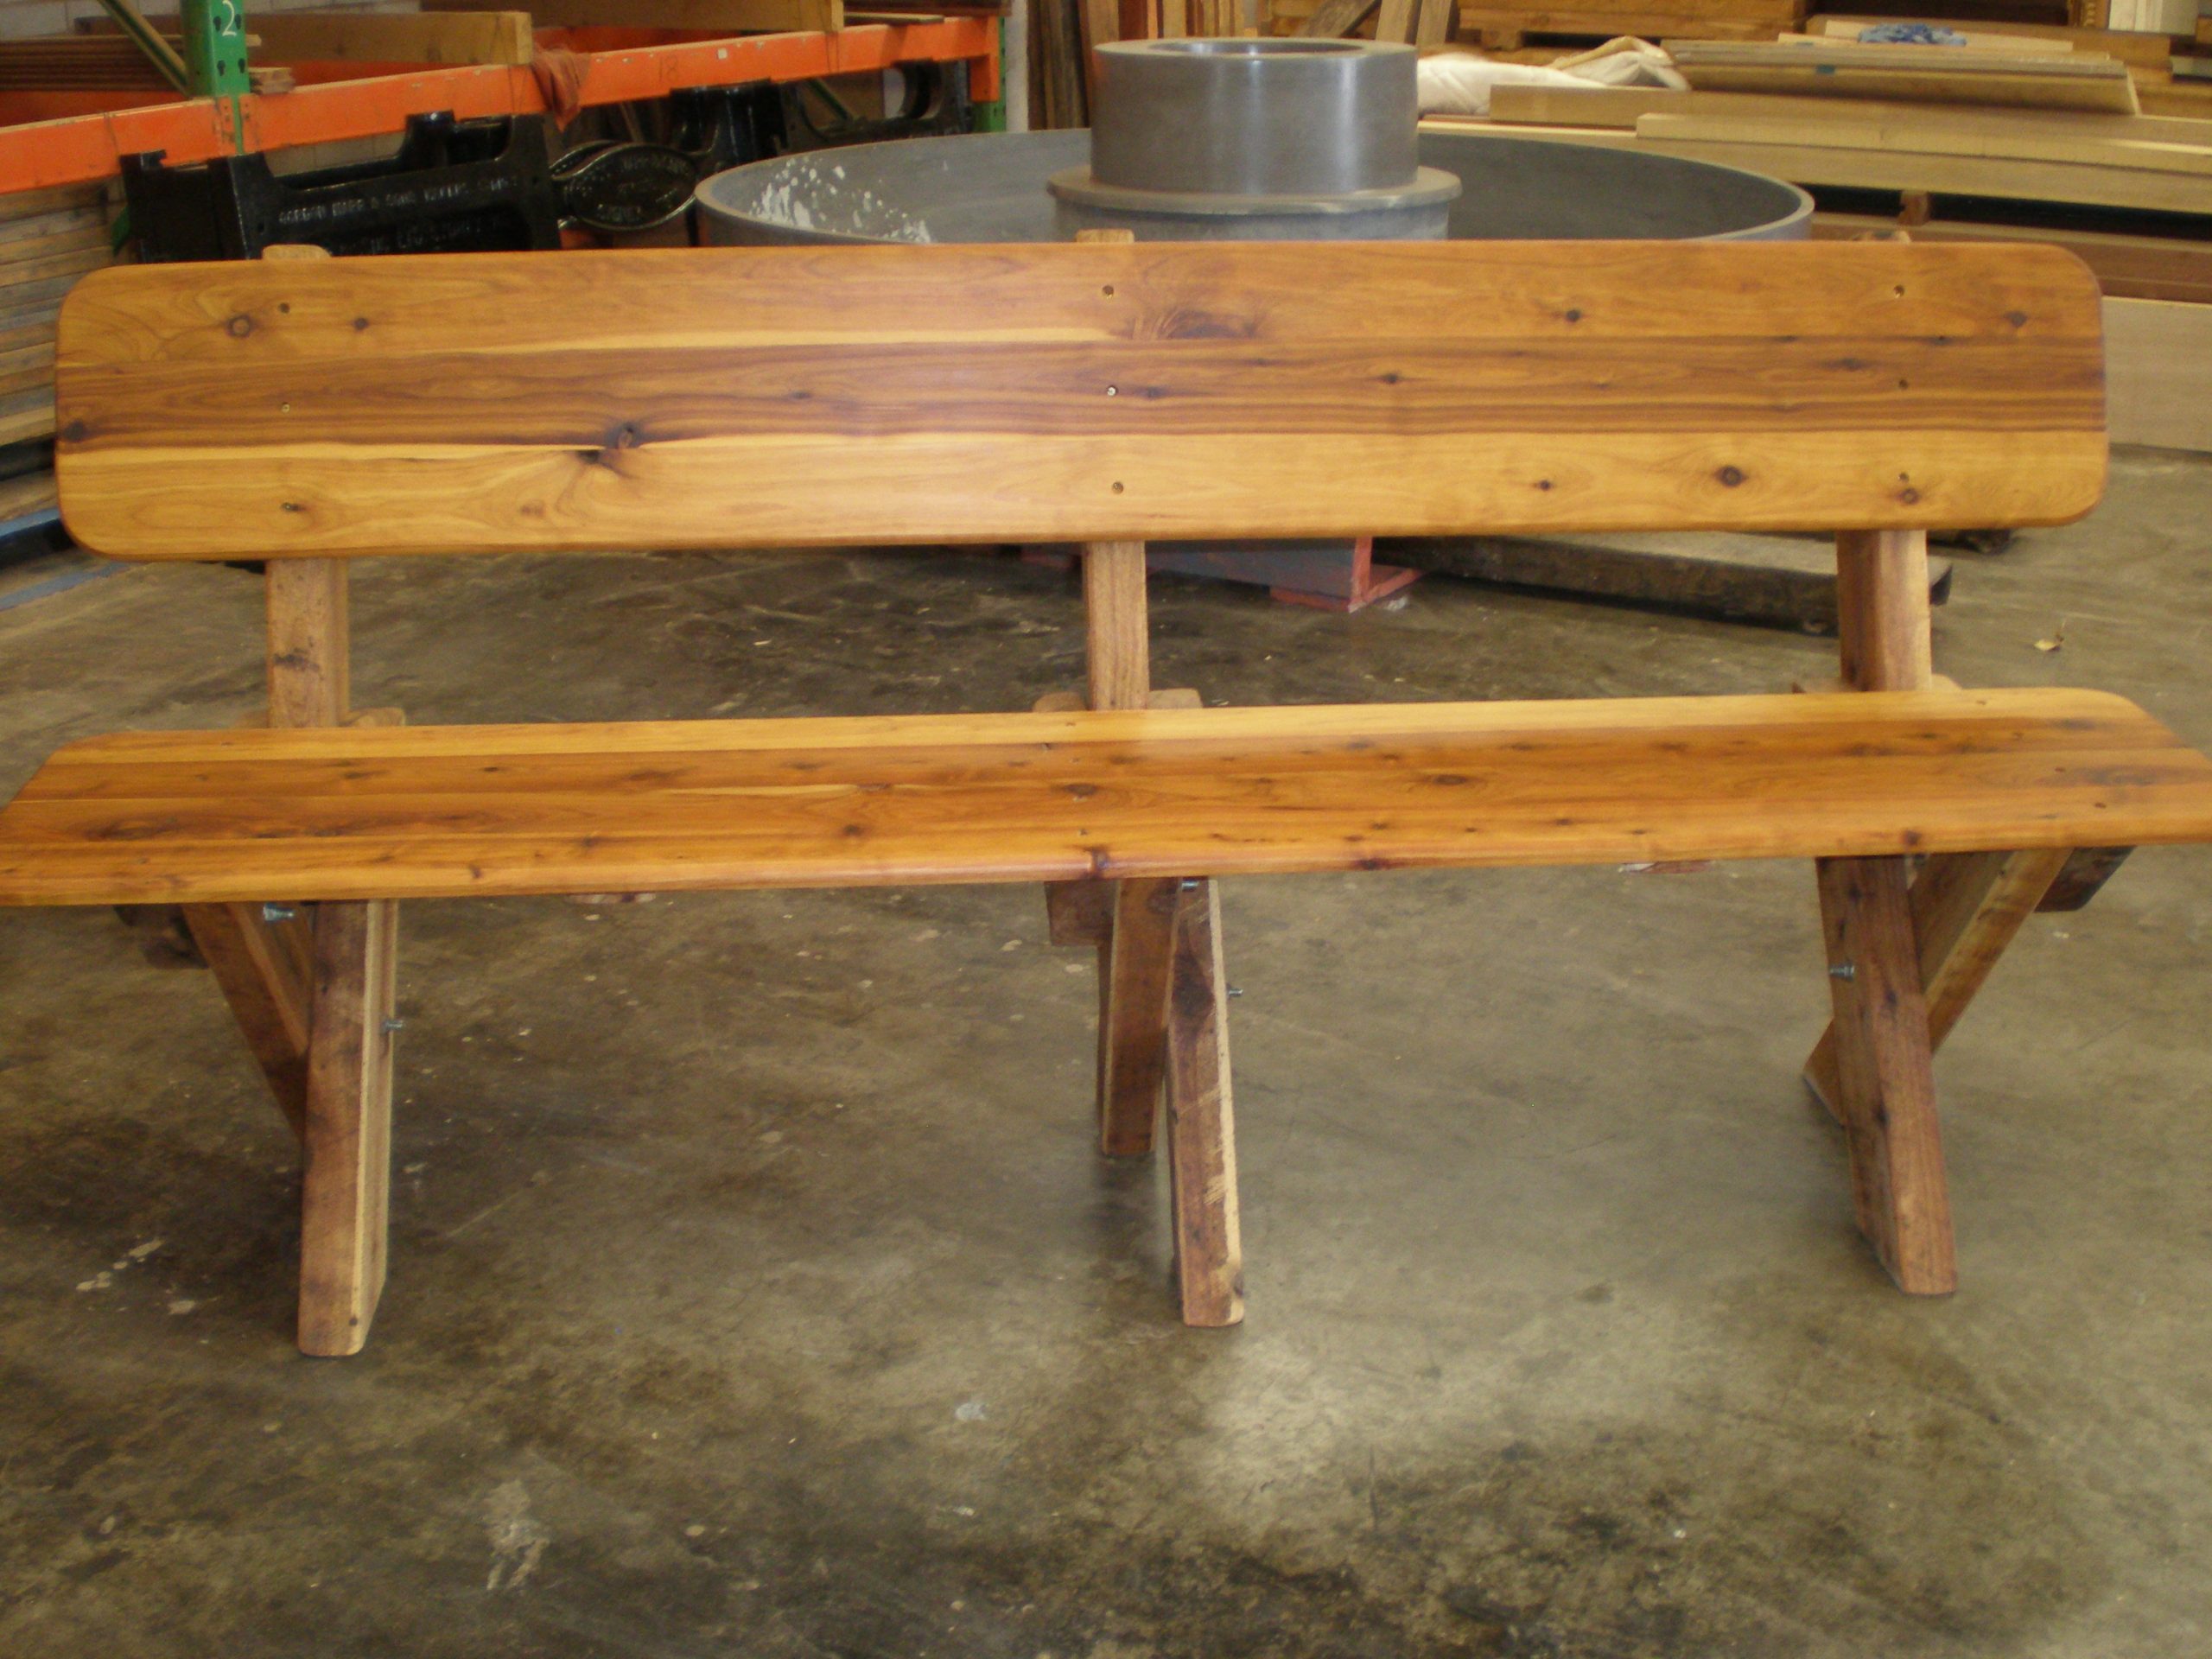 4 Seat High Back Cypress Outdoor Timber Bench available to order now